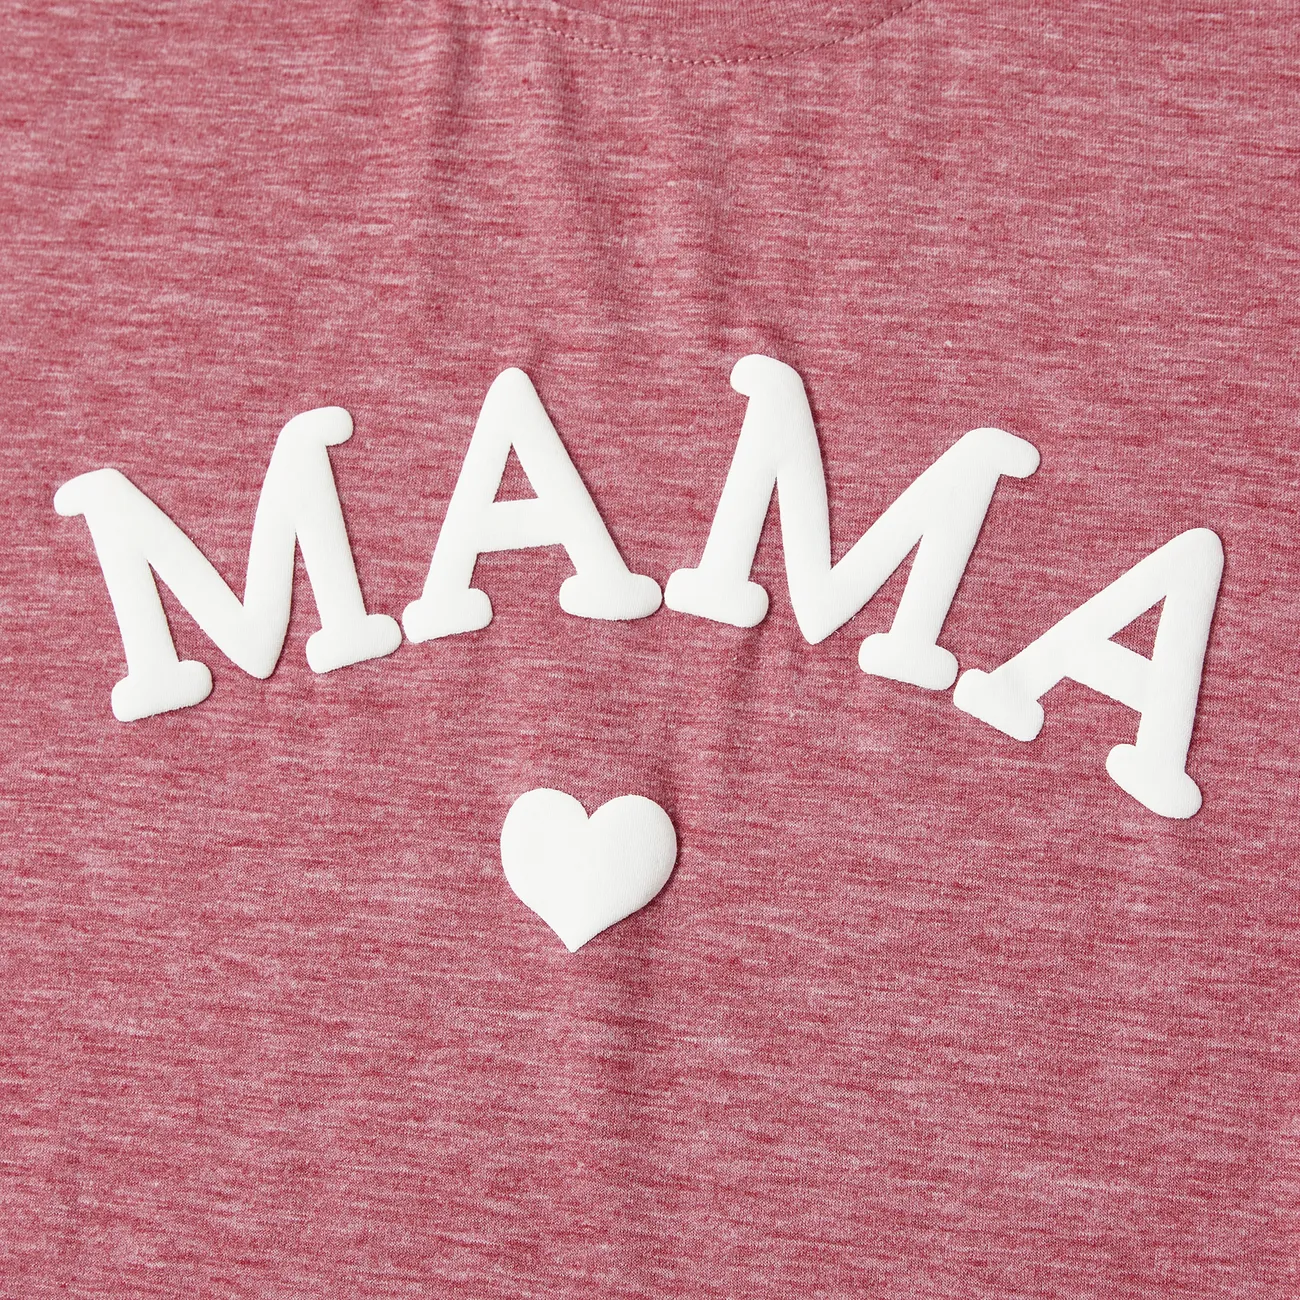 Mommy and Me Heart Pattern Cute Foam Printing Pink Tops PINK-1 big image 1